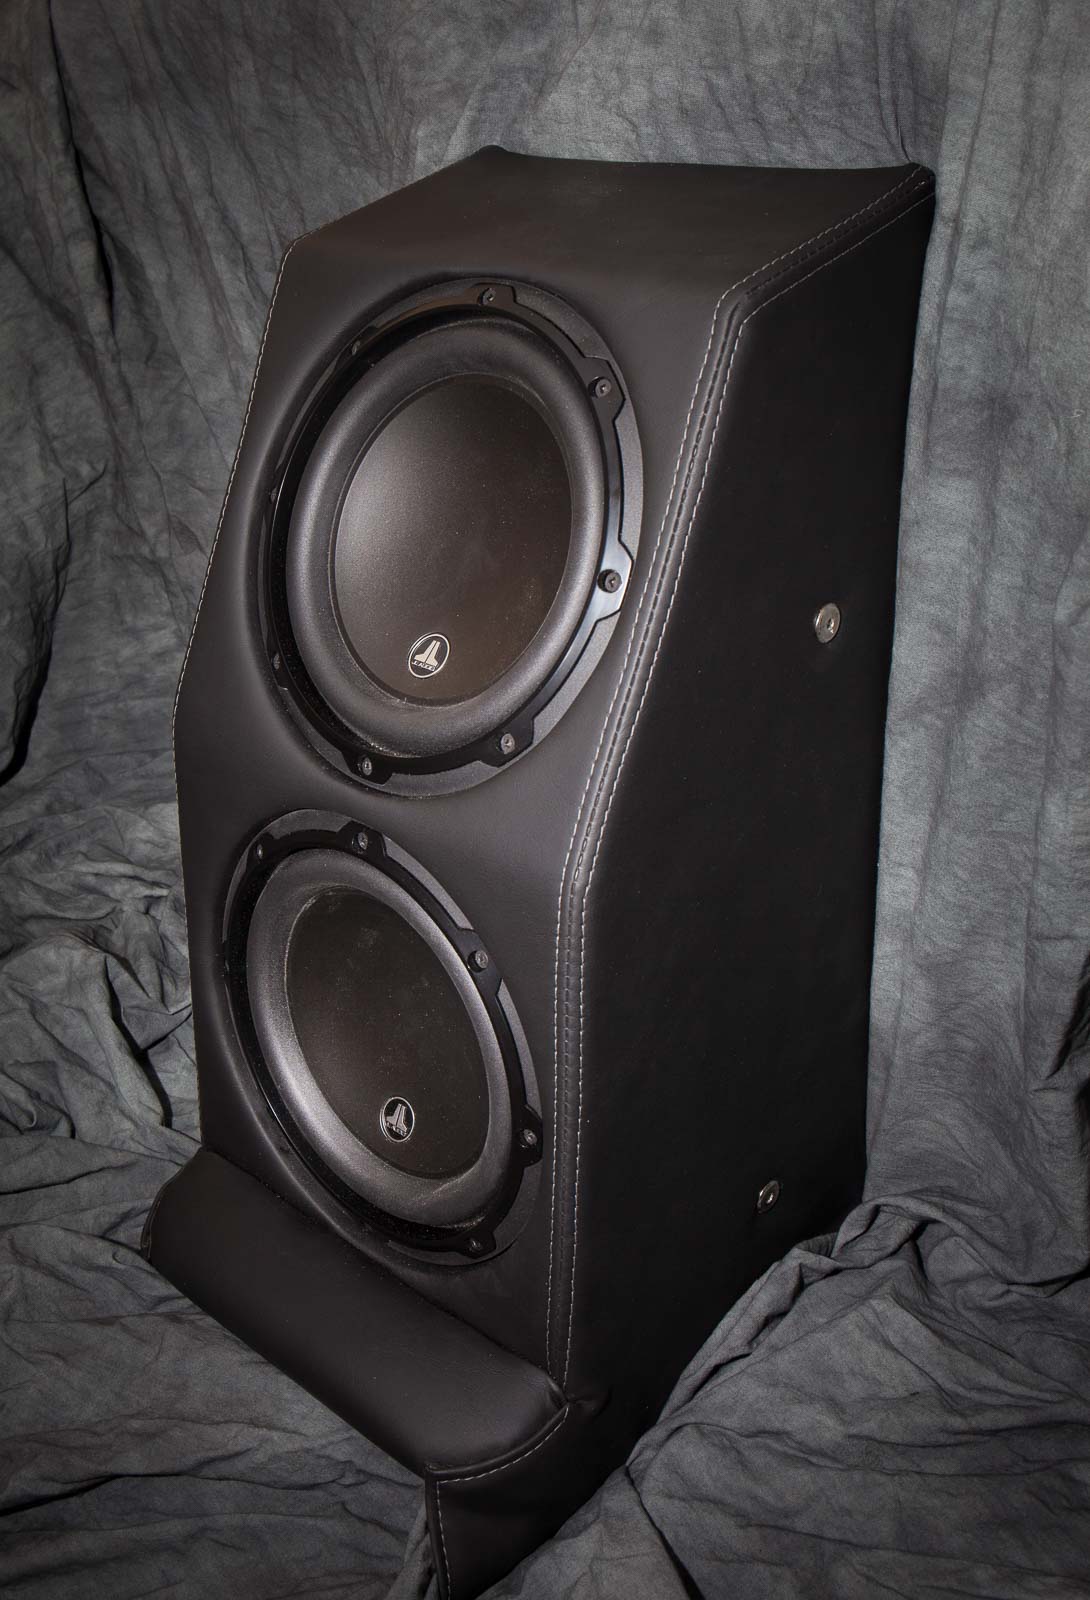 twin subwoofer box